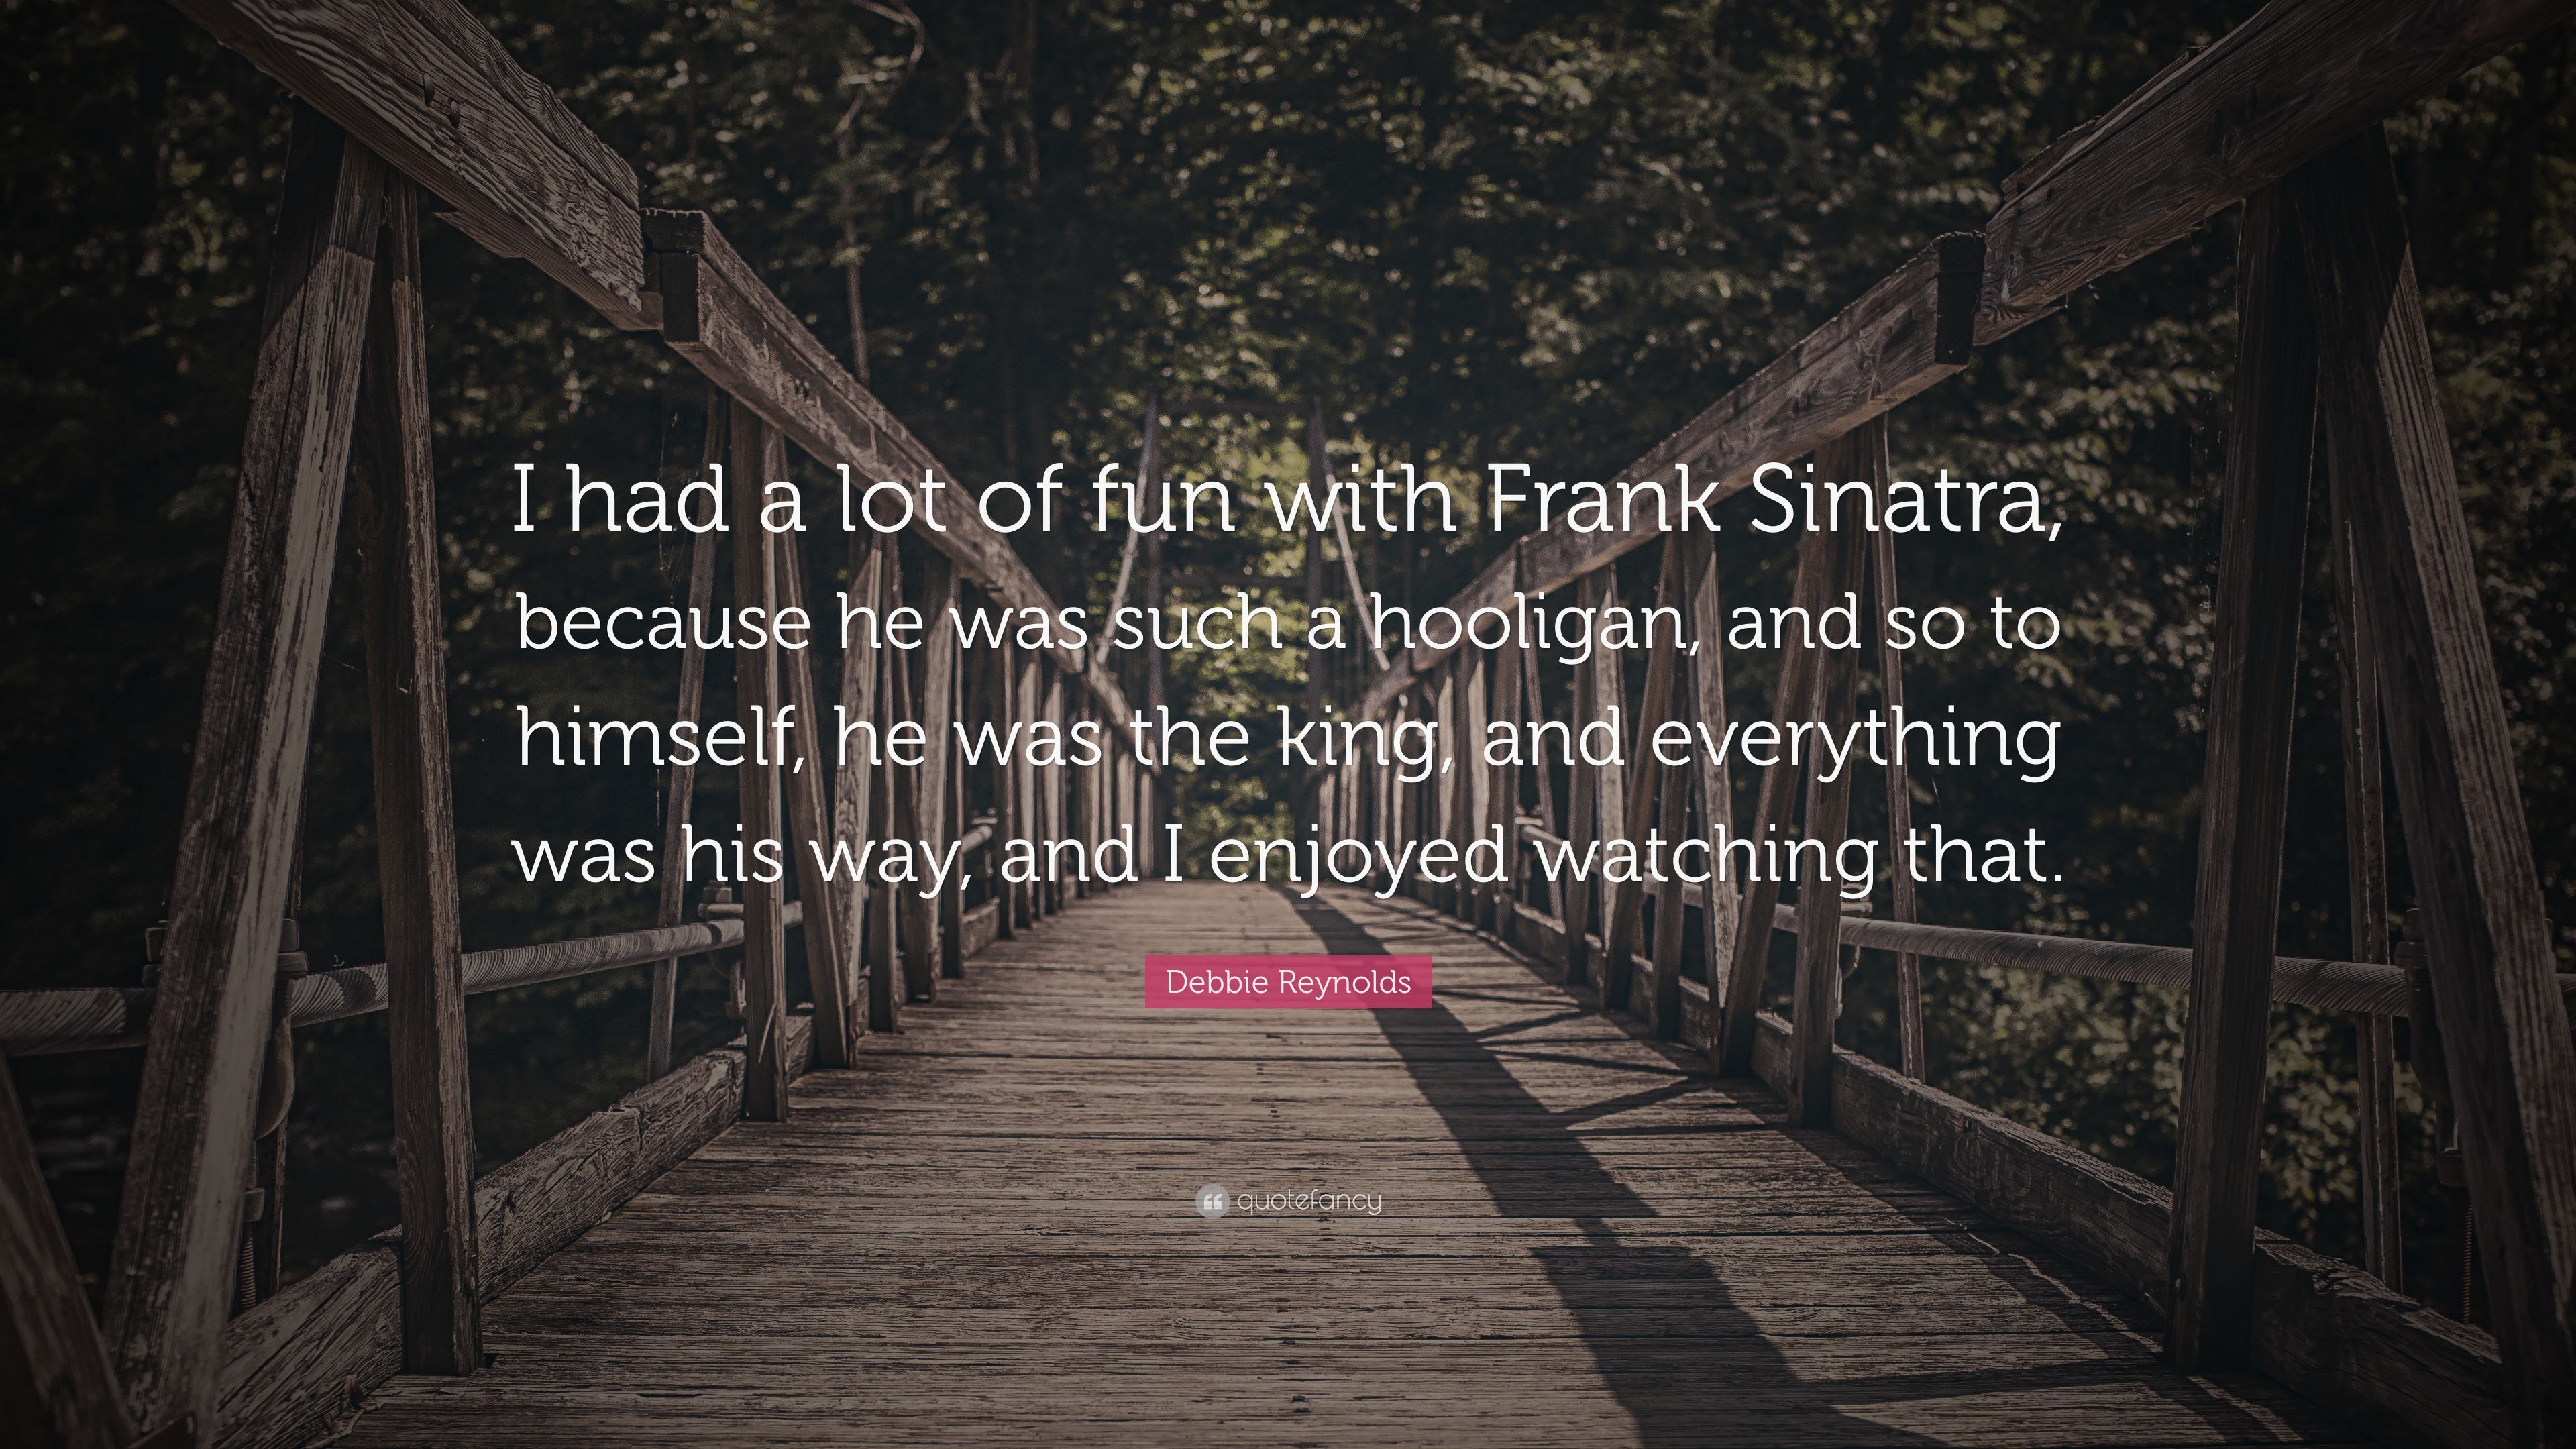 Debbie Reynolds Quote: “I had a lot of fun with Frank Sinatra